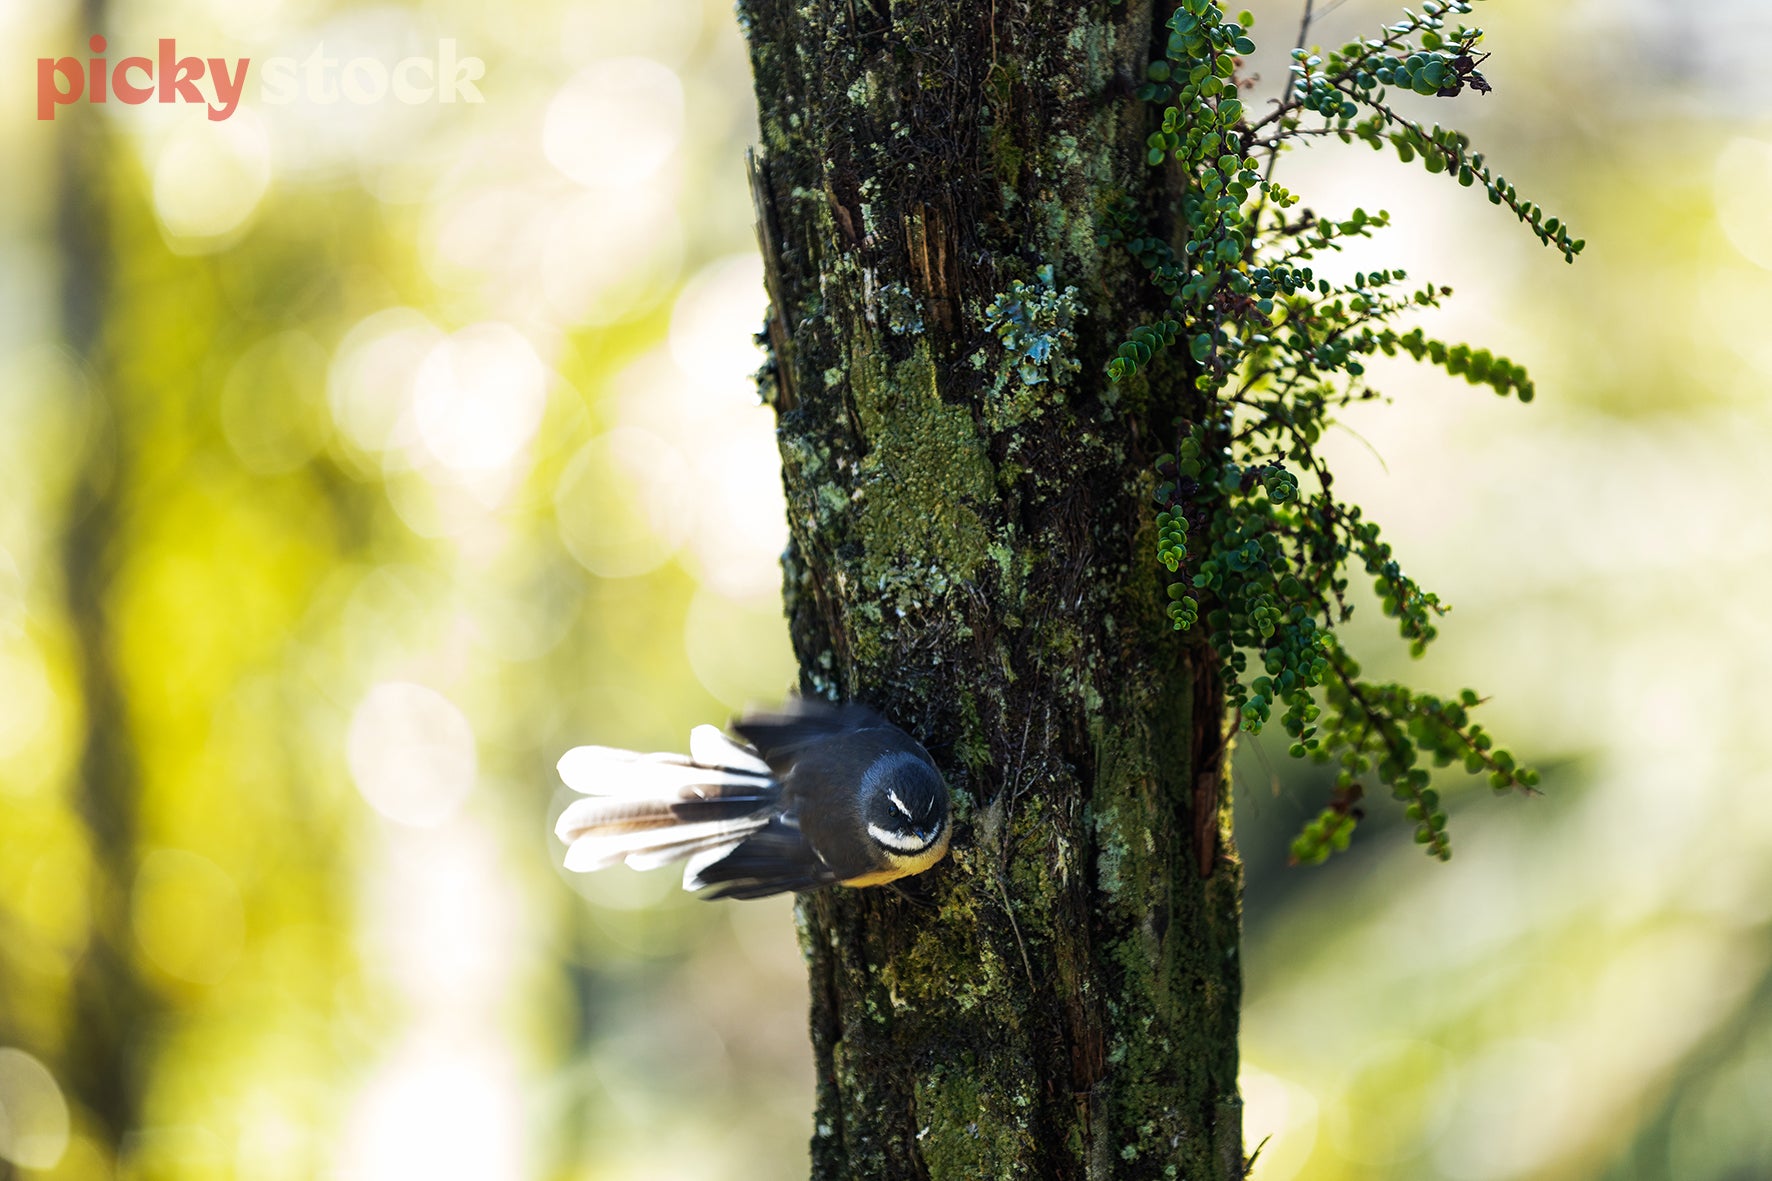 A fantail bird perches on a tree trunk. Trunk has some fresh green sprouts. Background is a soft green, shallow depth of field. 